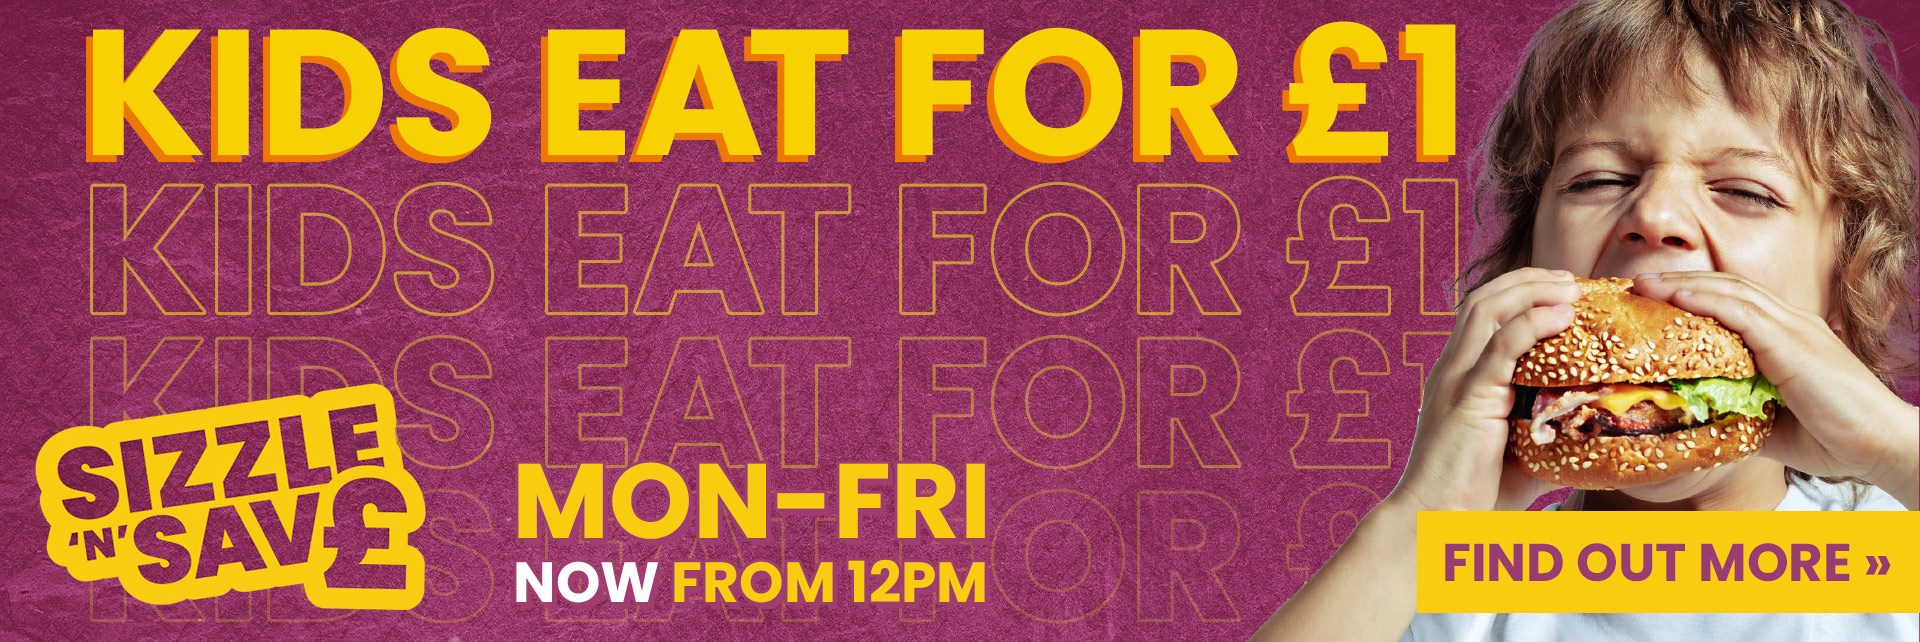 Kids eat for £1 at The National